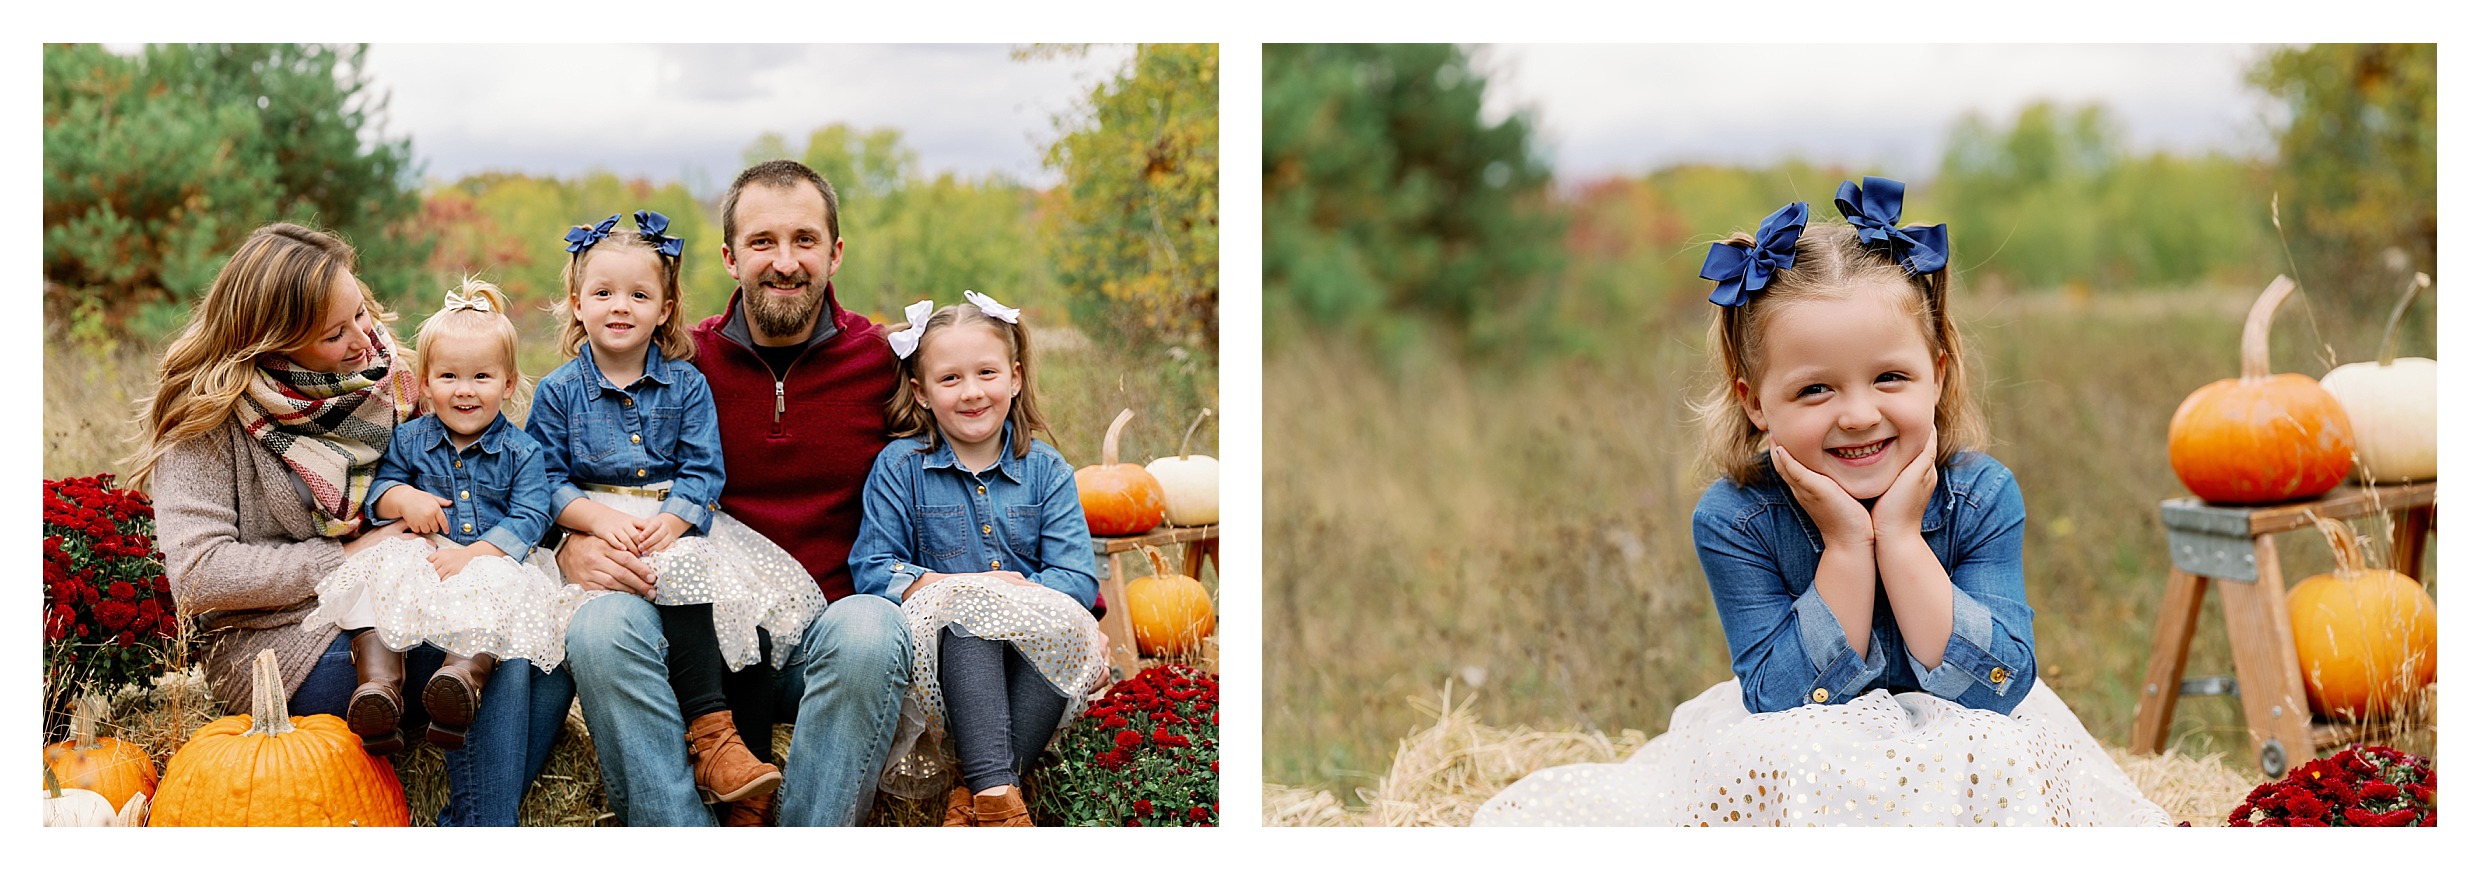 fall themed family mini session with pumpkins, hay bales, mums at Wausau Park 